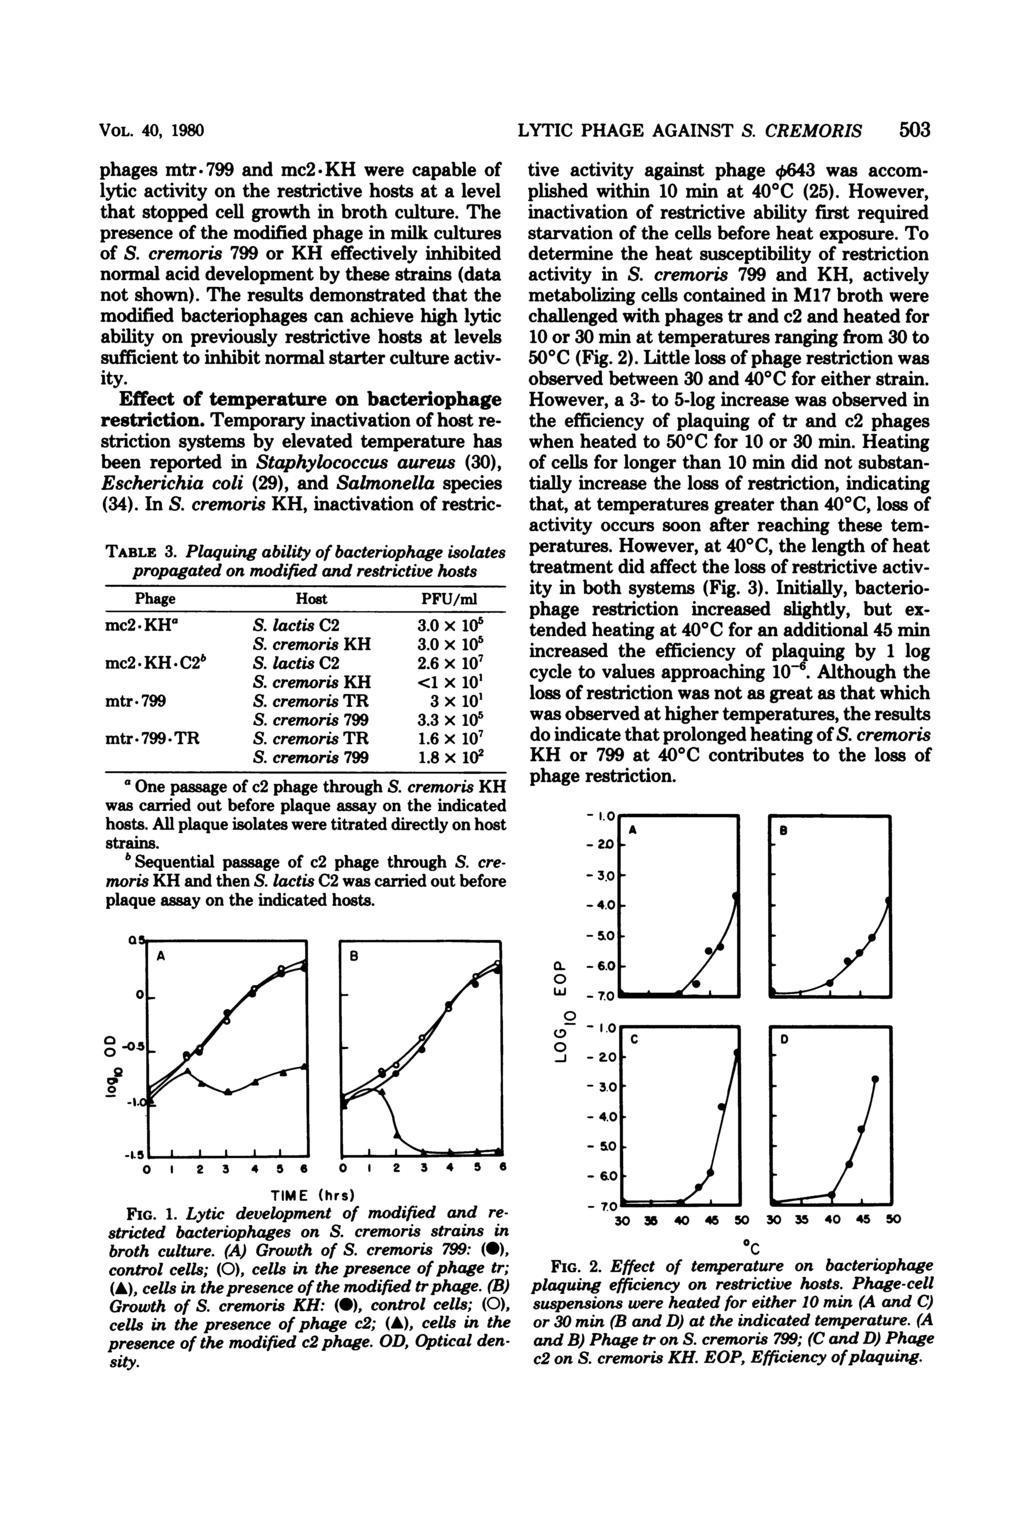 VOL. 4, 198 phages mtr 799 and mc2. KH were capable of lytic activity on the restrictive hosts at a level that stopped cell growth in broth culture.